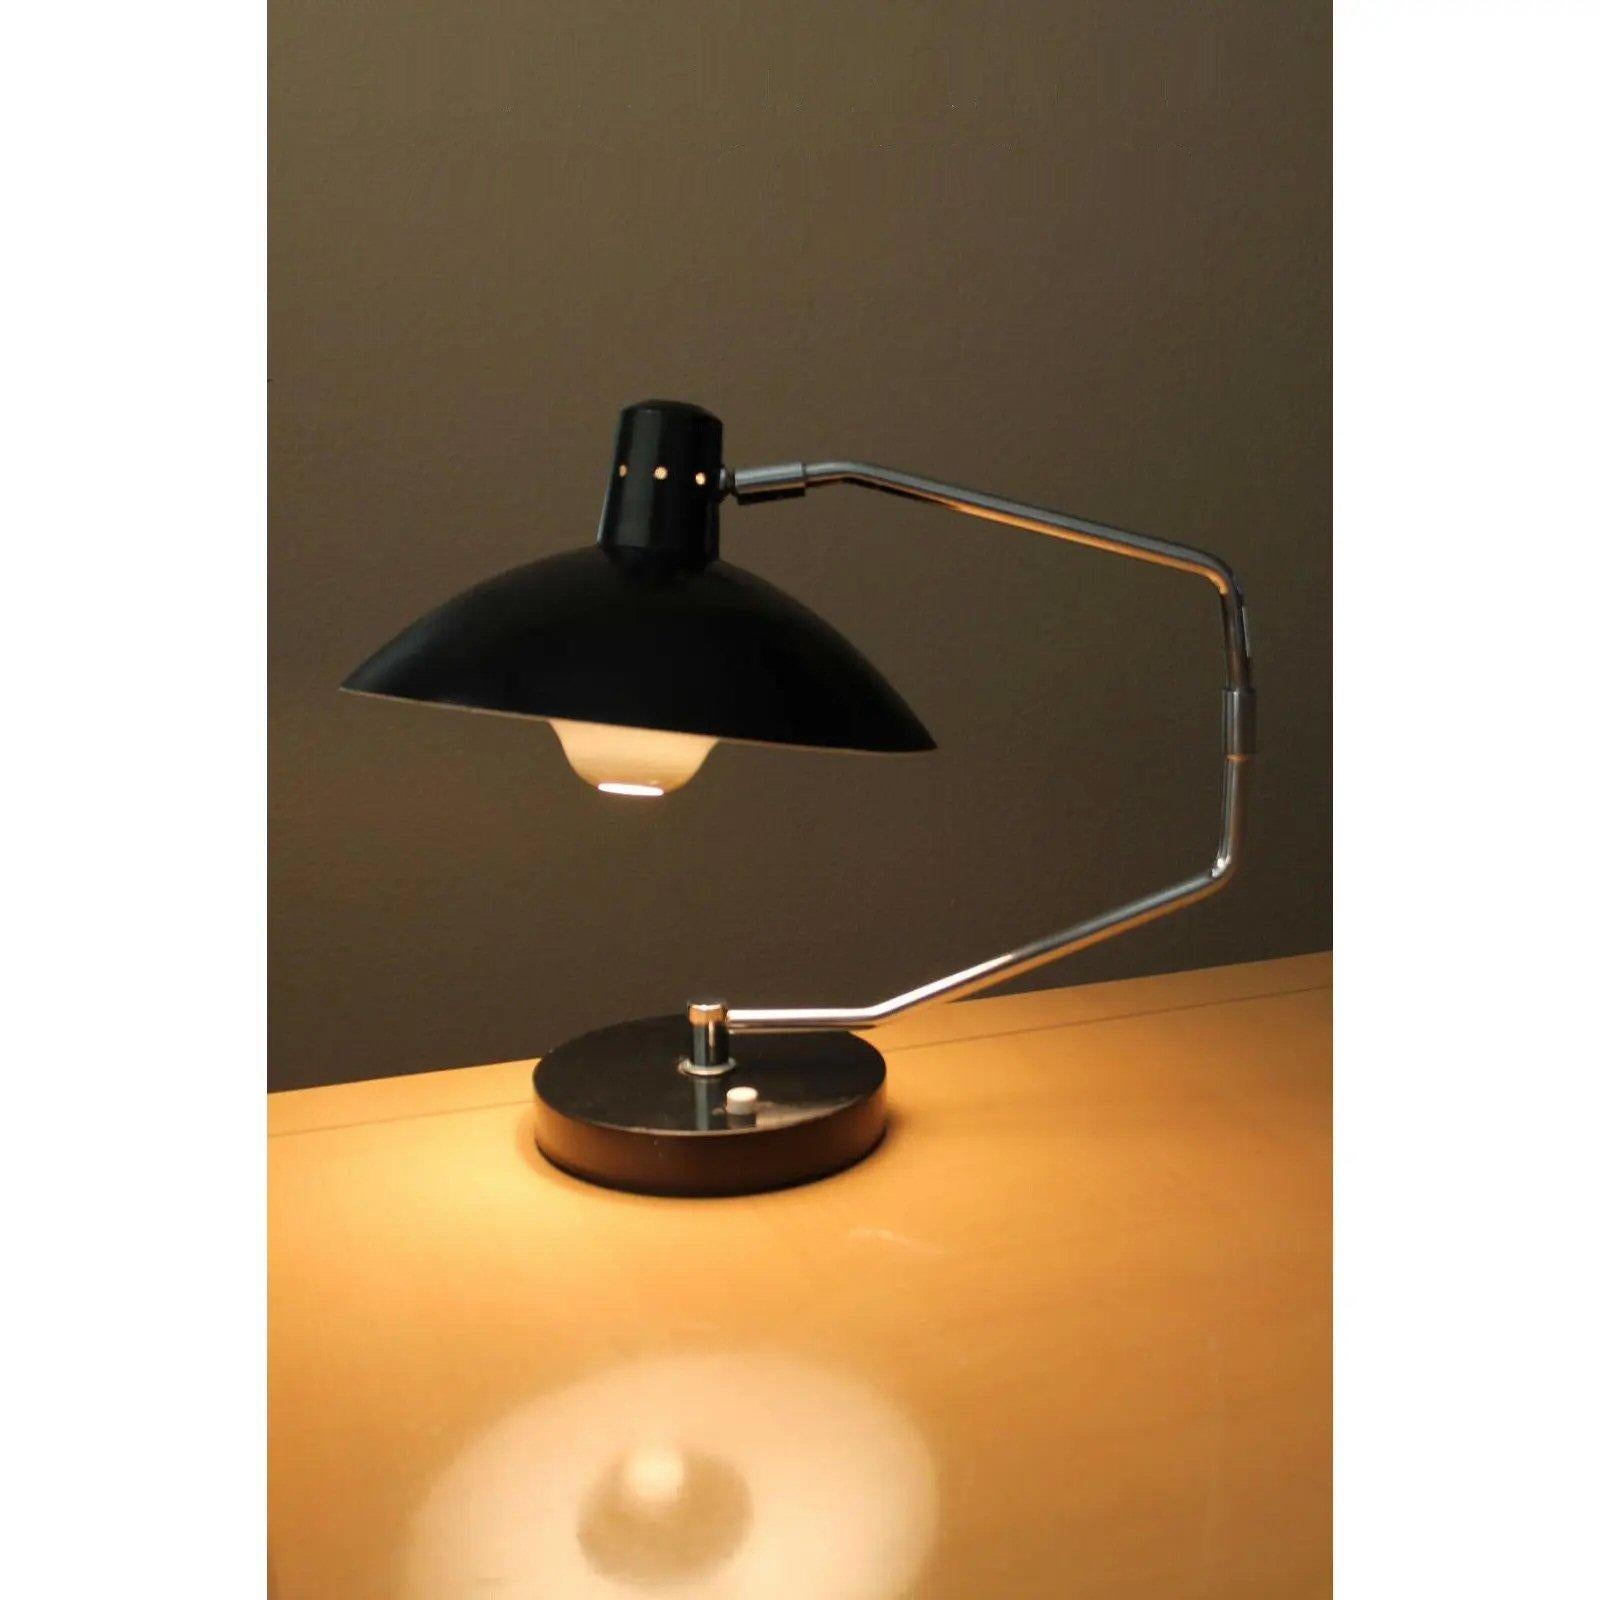 CLAY MICHIE FOR KNOLL
ARTICULATING SAUCER DESK LAMP
NO. 8
RARE
W/ BULB DIFFUSER

DIMENSIONS: Approximately 17